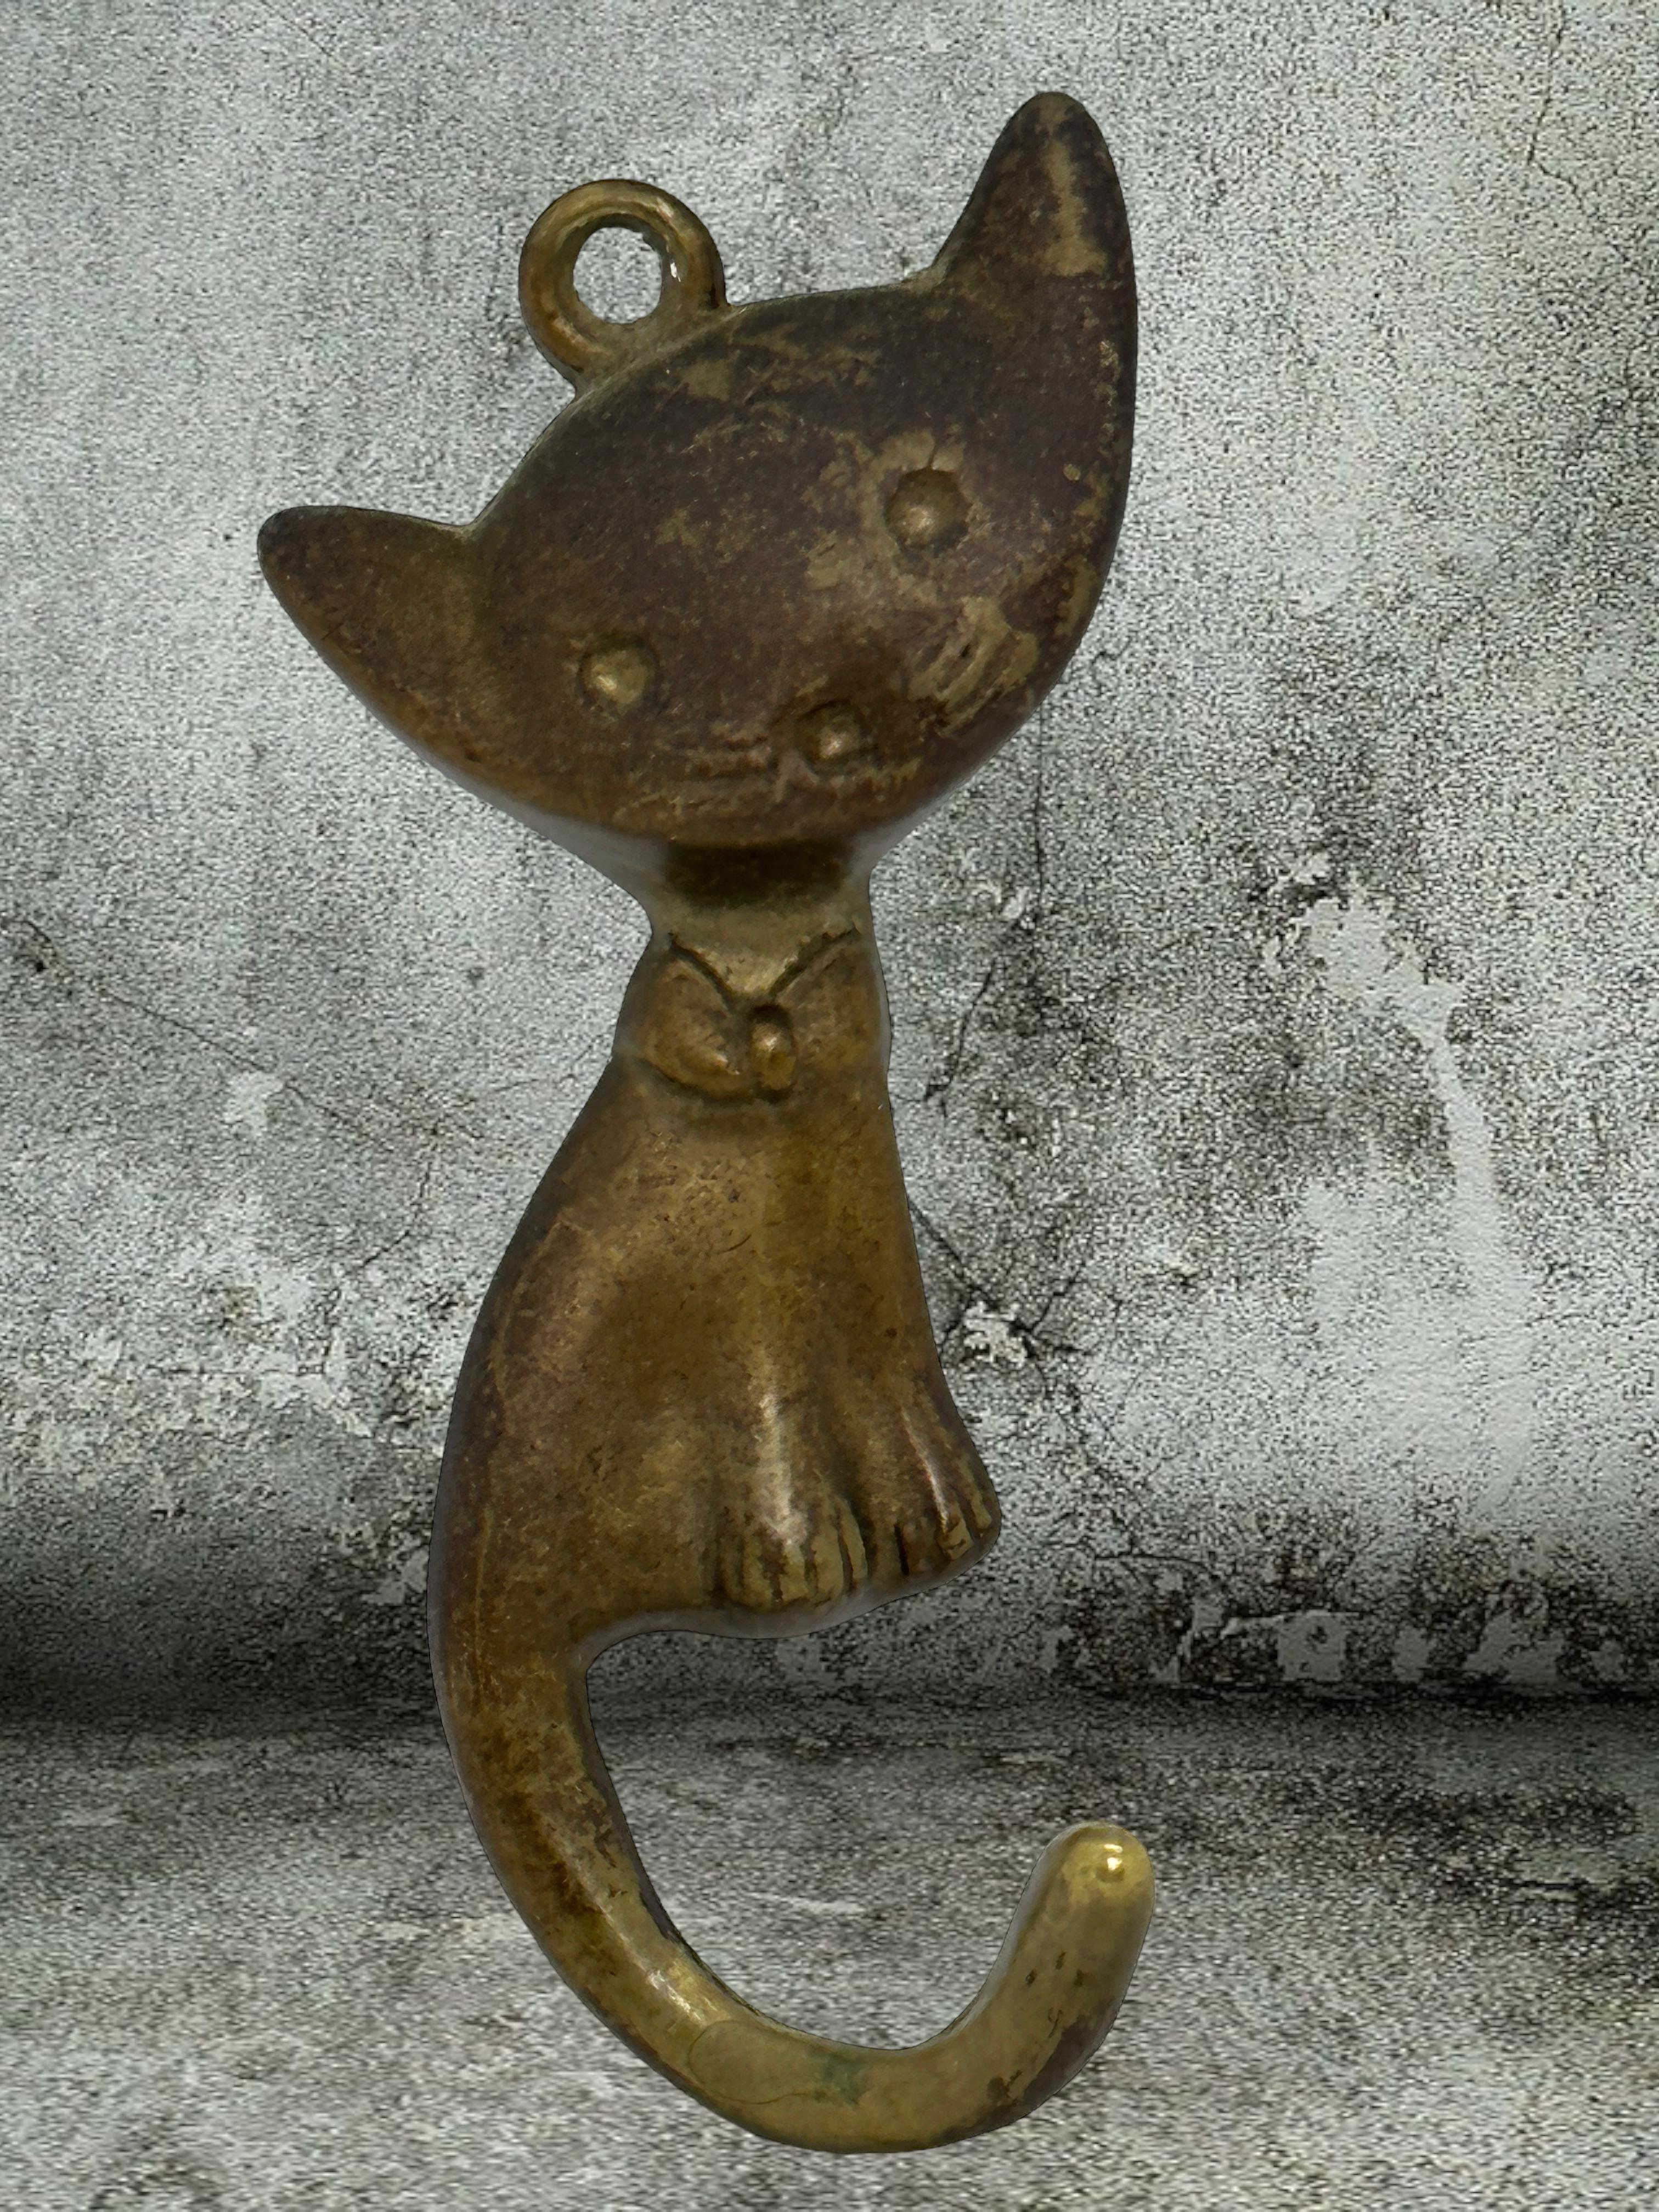 A cute Bosse Era style wall hook, made in the 1960s. It is made of Brass or some kind of metal. Wear of use, lovely patina, some use-lanes but this is old-age. Found at an Estate Sale in Vienna, Austria. A nice addition for your entry hall or any